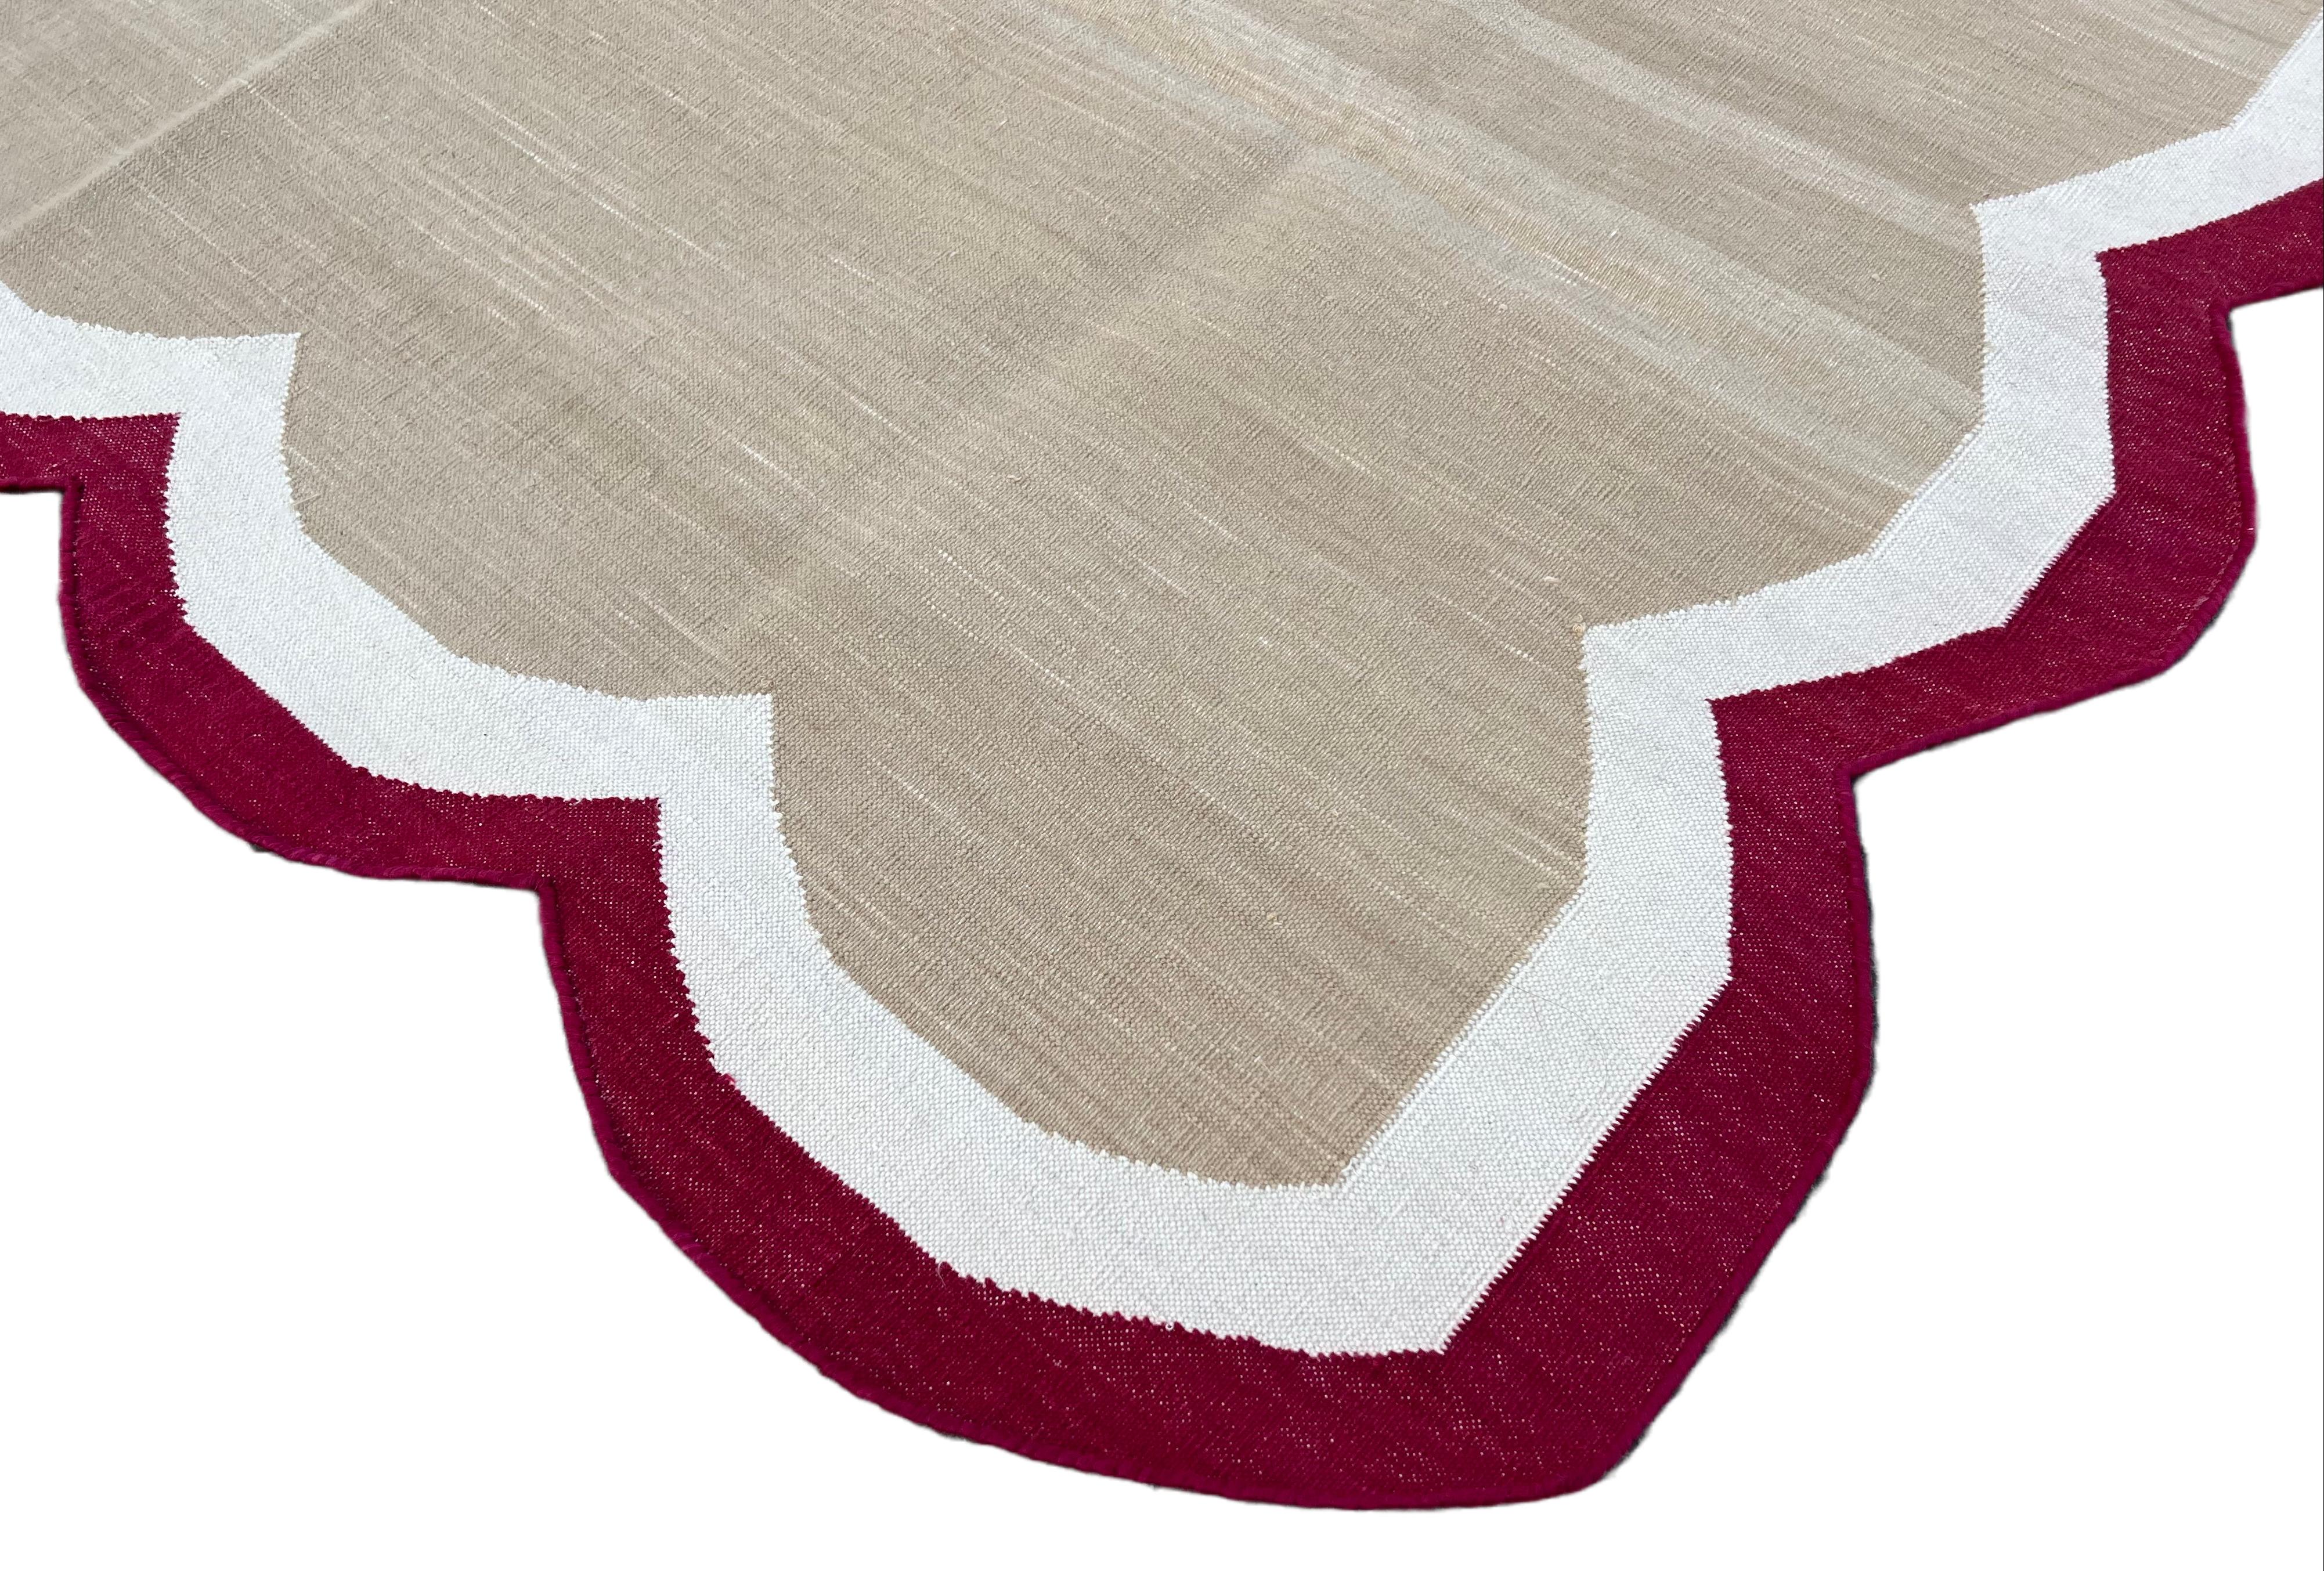 Mid-Century Modern Handmade Cotton Area Flat Weave Rug, 3x5 Beige And Red Scalloped Kilim Dhurrie For Sale